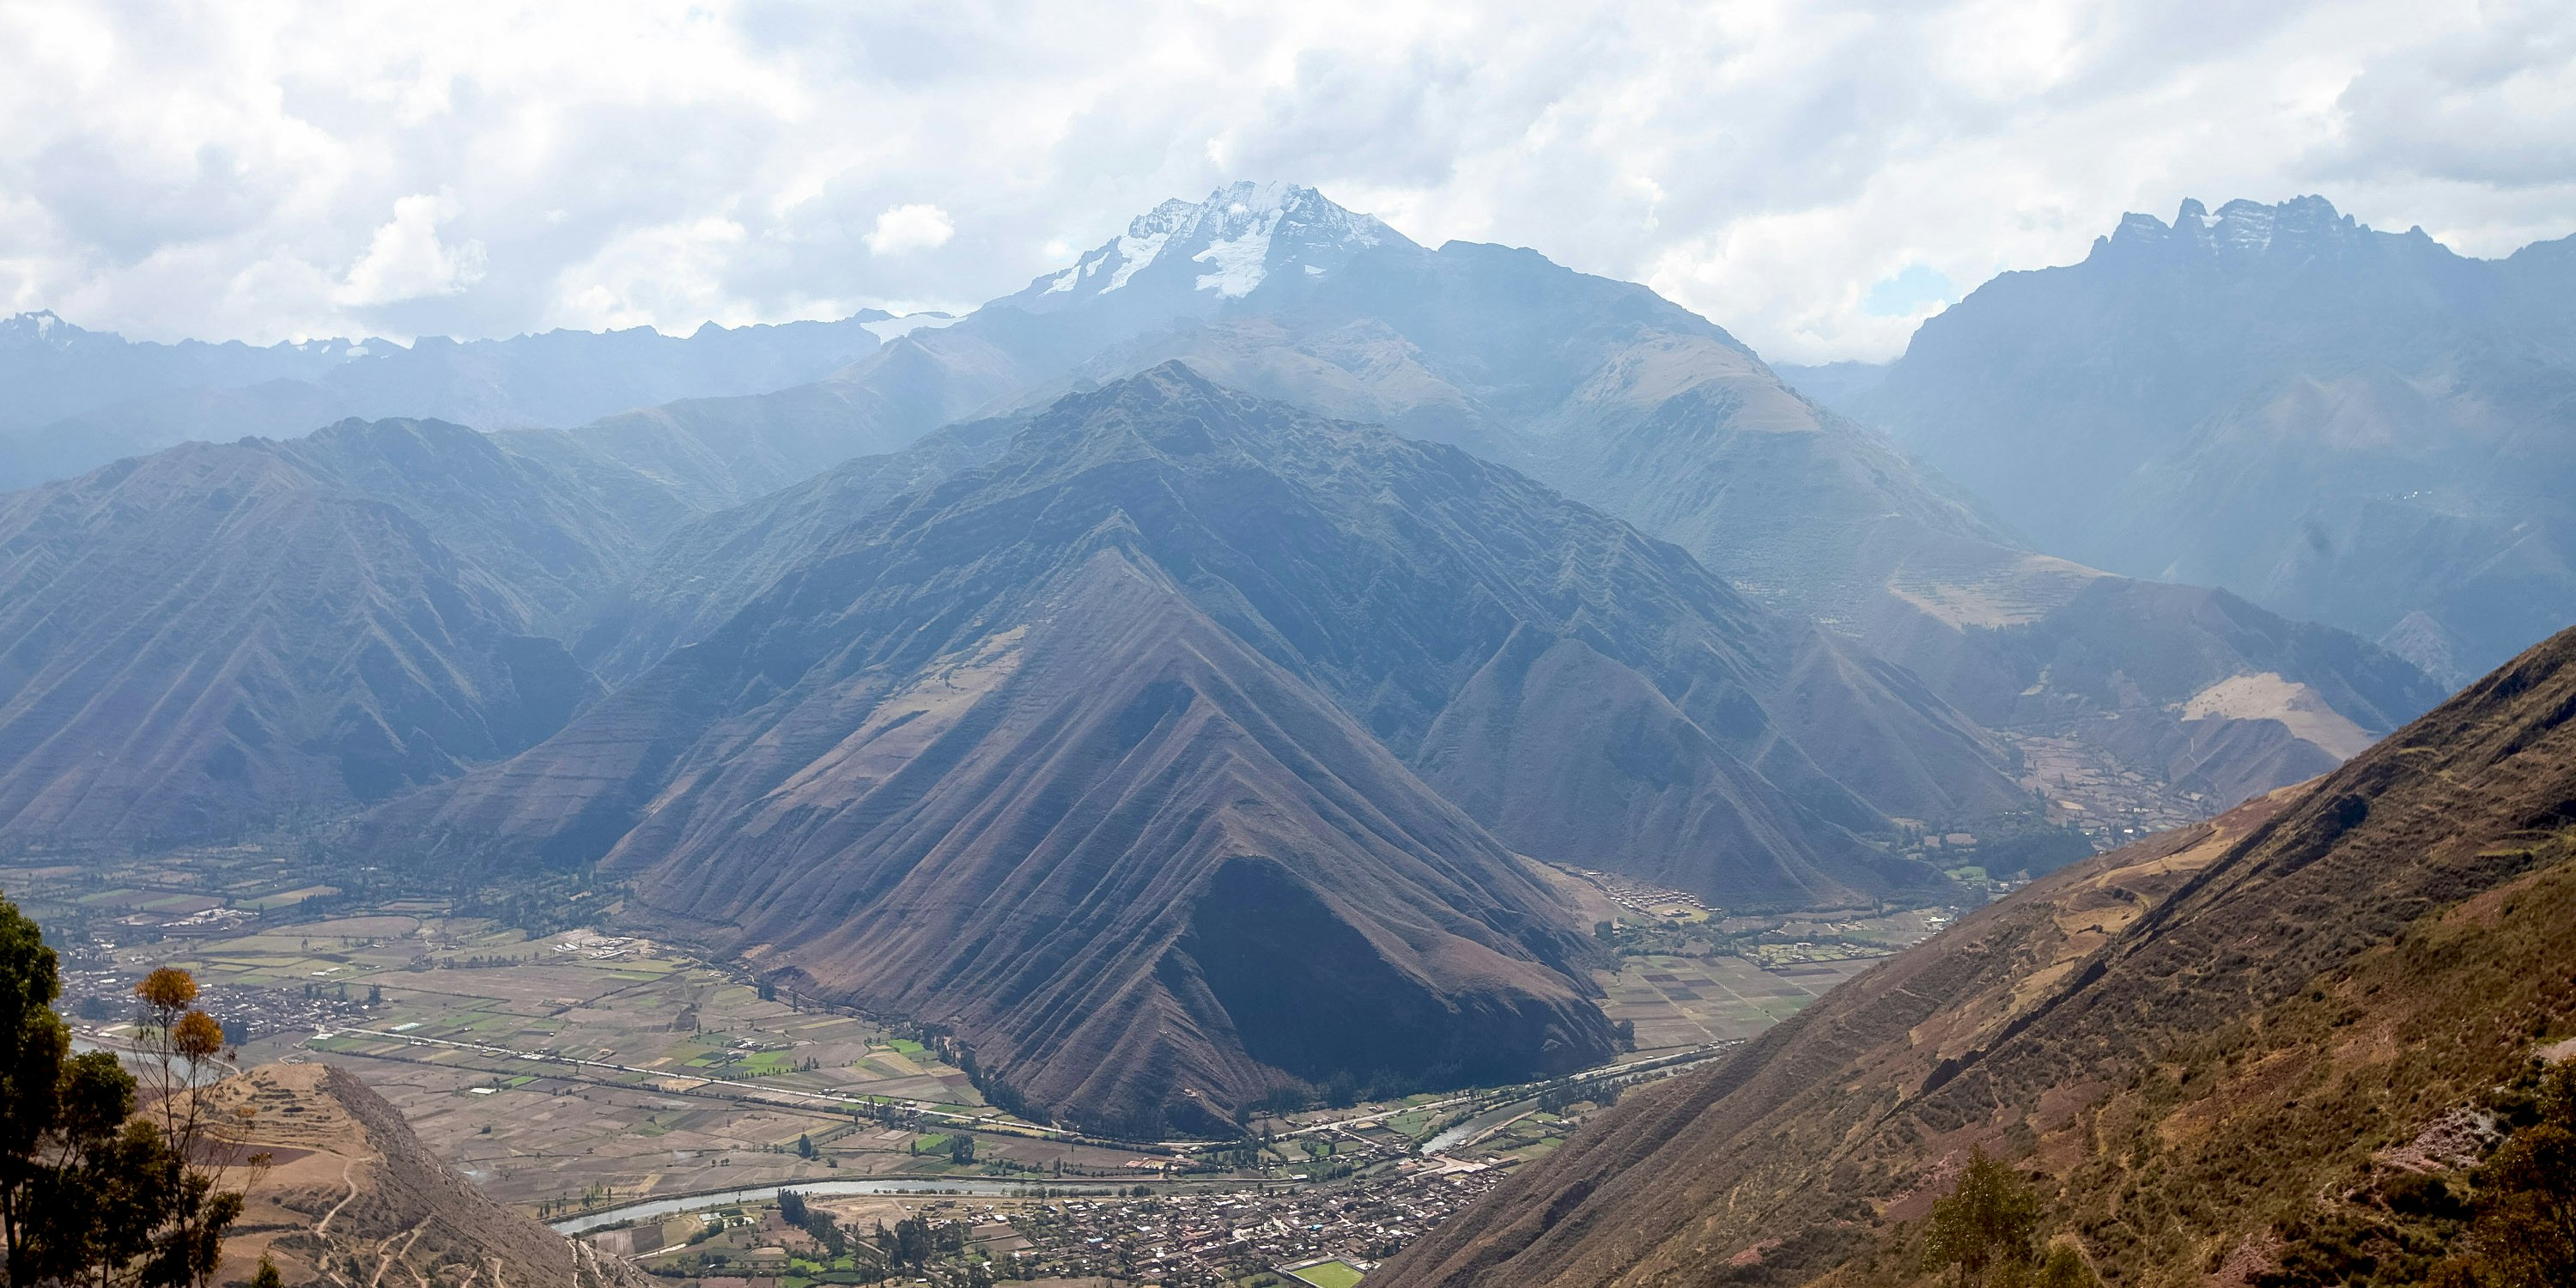 A to Z: Everything You Need to Know About Traveling to Peru